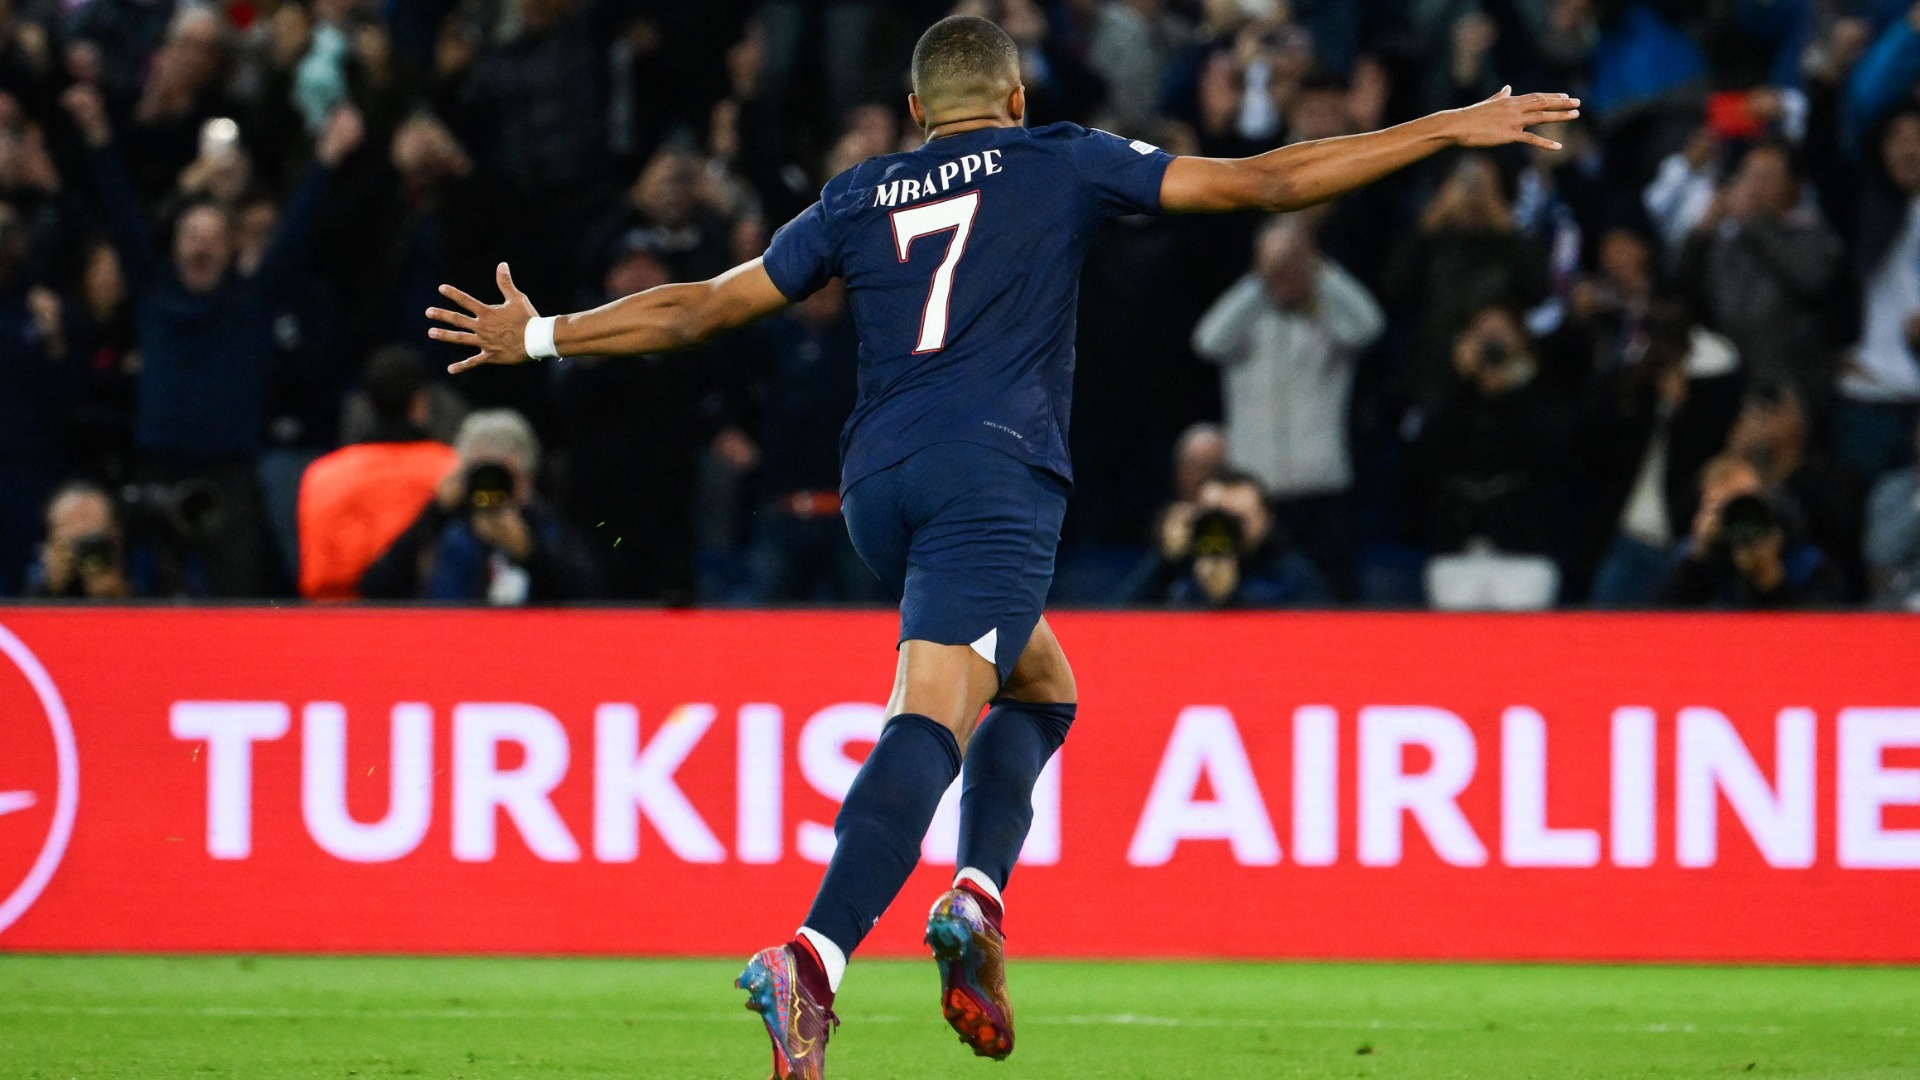 It's not real news' - Campos issues emphatic denial of Mbappe PSG exit  rumours